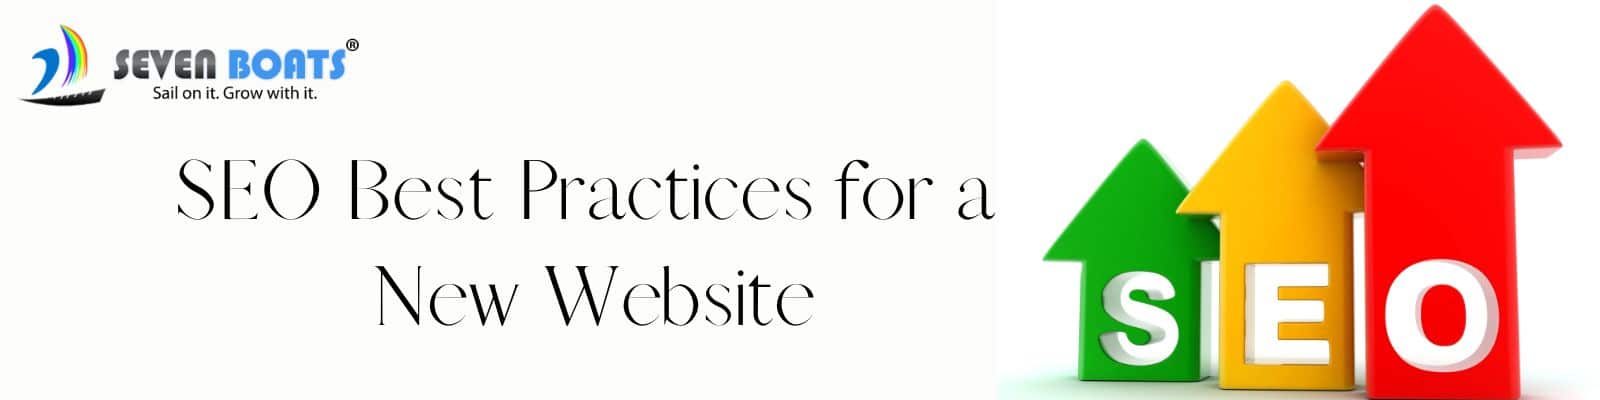 SEO best practices for a new website